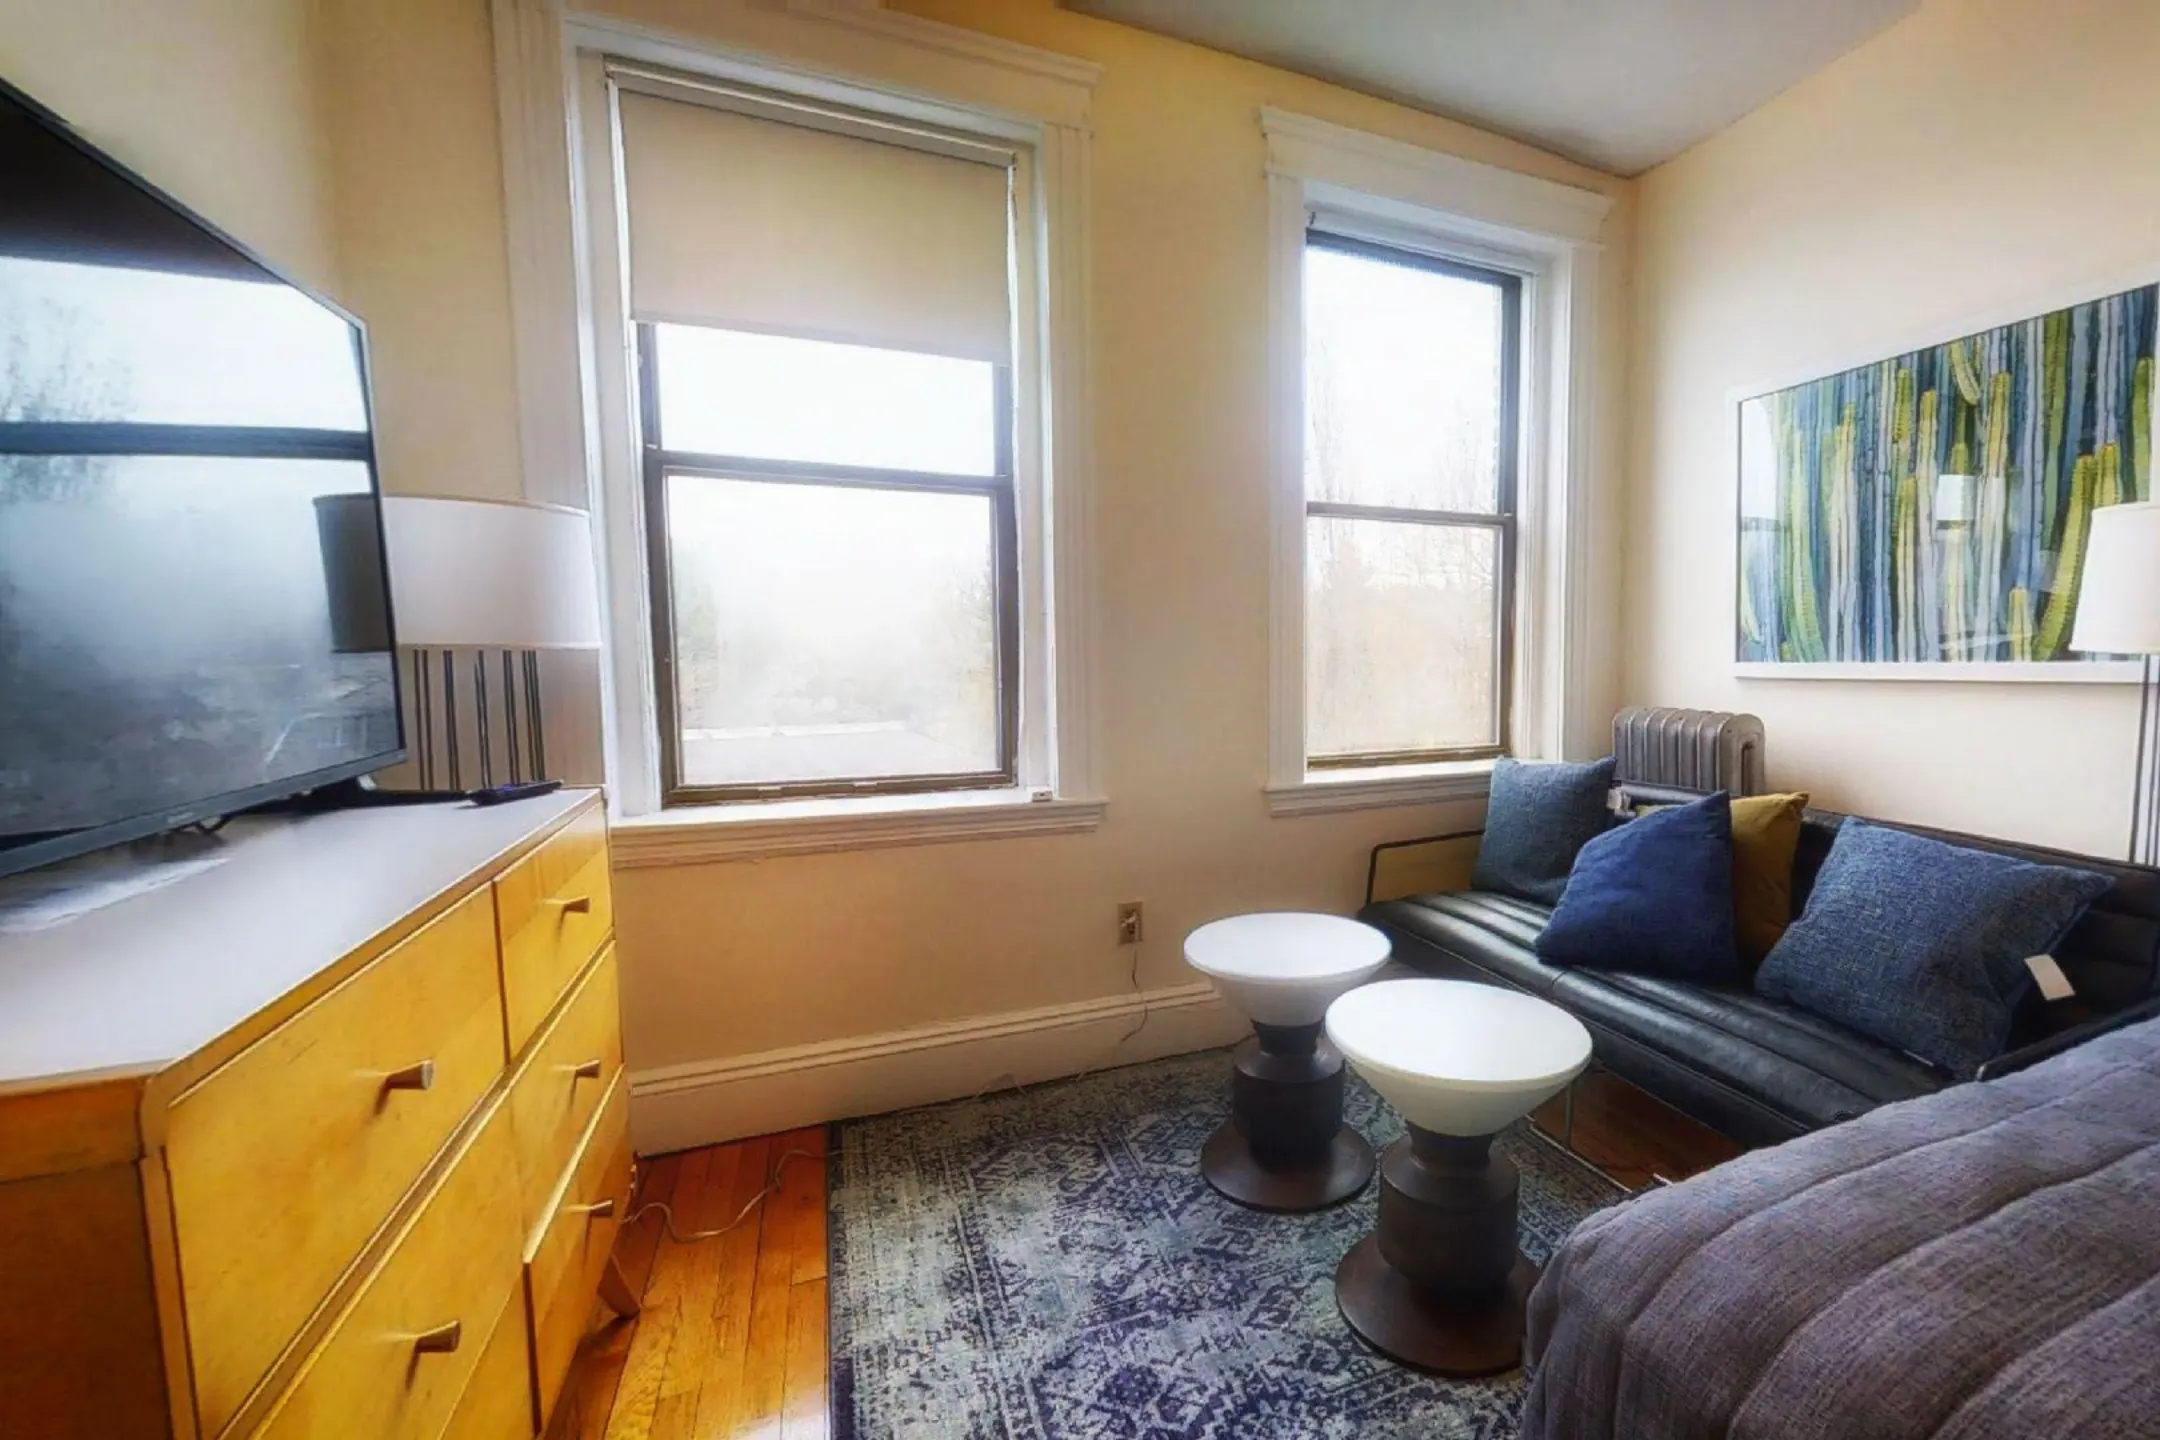 Living Room - Commonwealth Apartments - Allston, MA